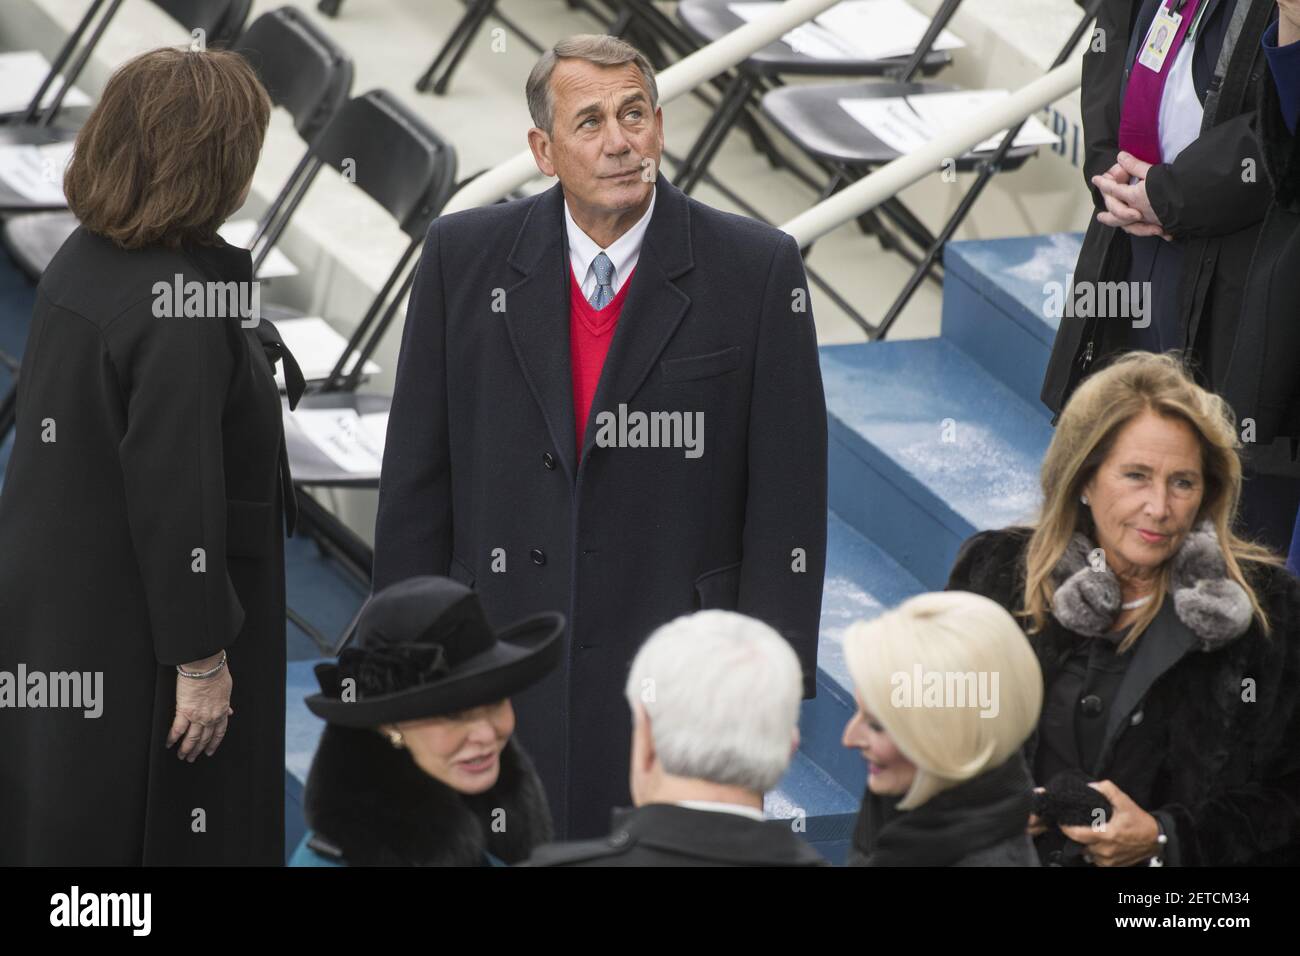 UNITED STATES - JANUARY 20: Former Speaker of the House John Boehner, R-Ohio, waits for Donald J. Trump to be sworn in as the 45th President of the United States on the West Front of the Capitol, January 20, 2017. (Photo By Tom Williams/CQ Roll Call) *** Please Use Credit from Credit Field *** Stock Photo